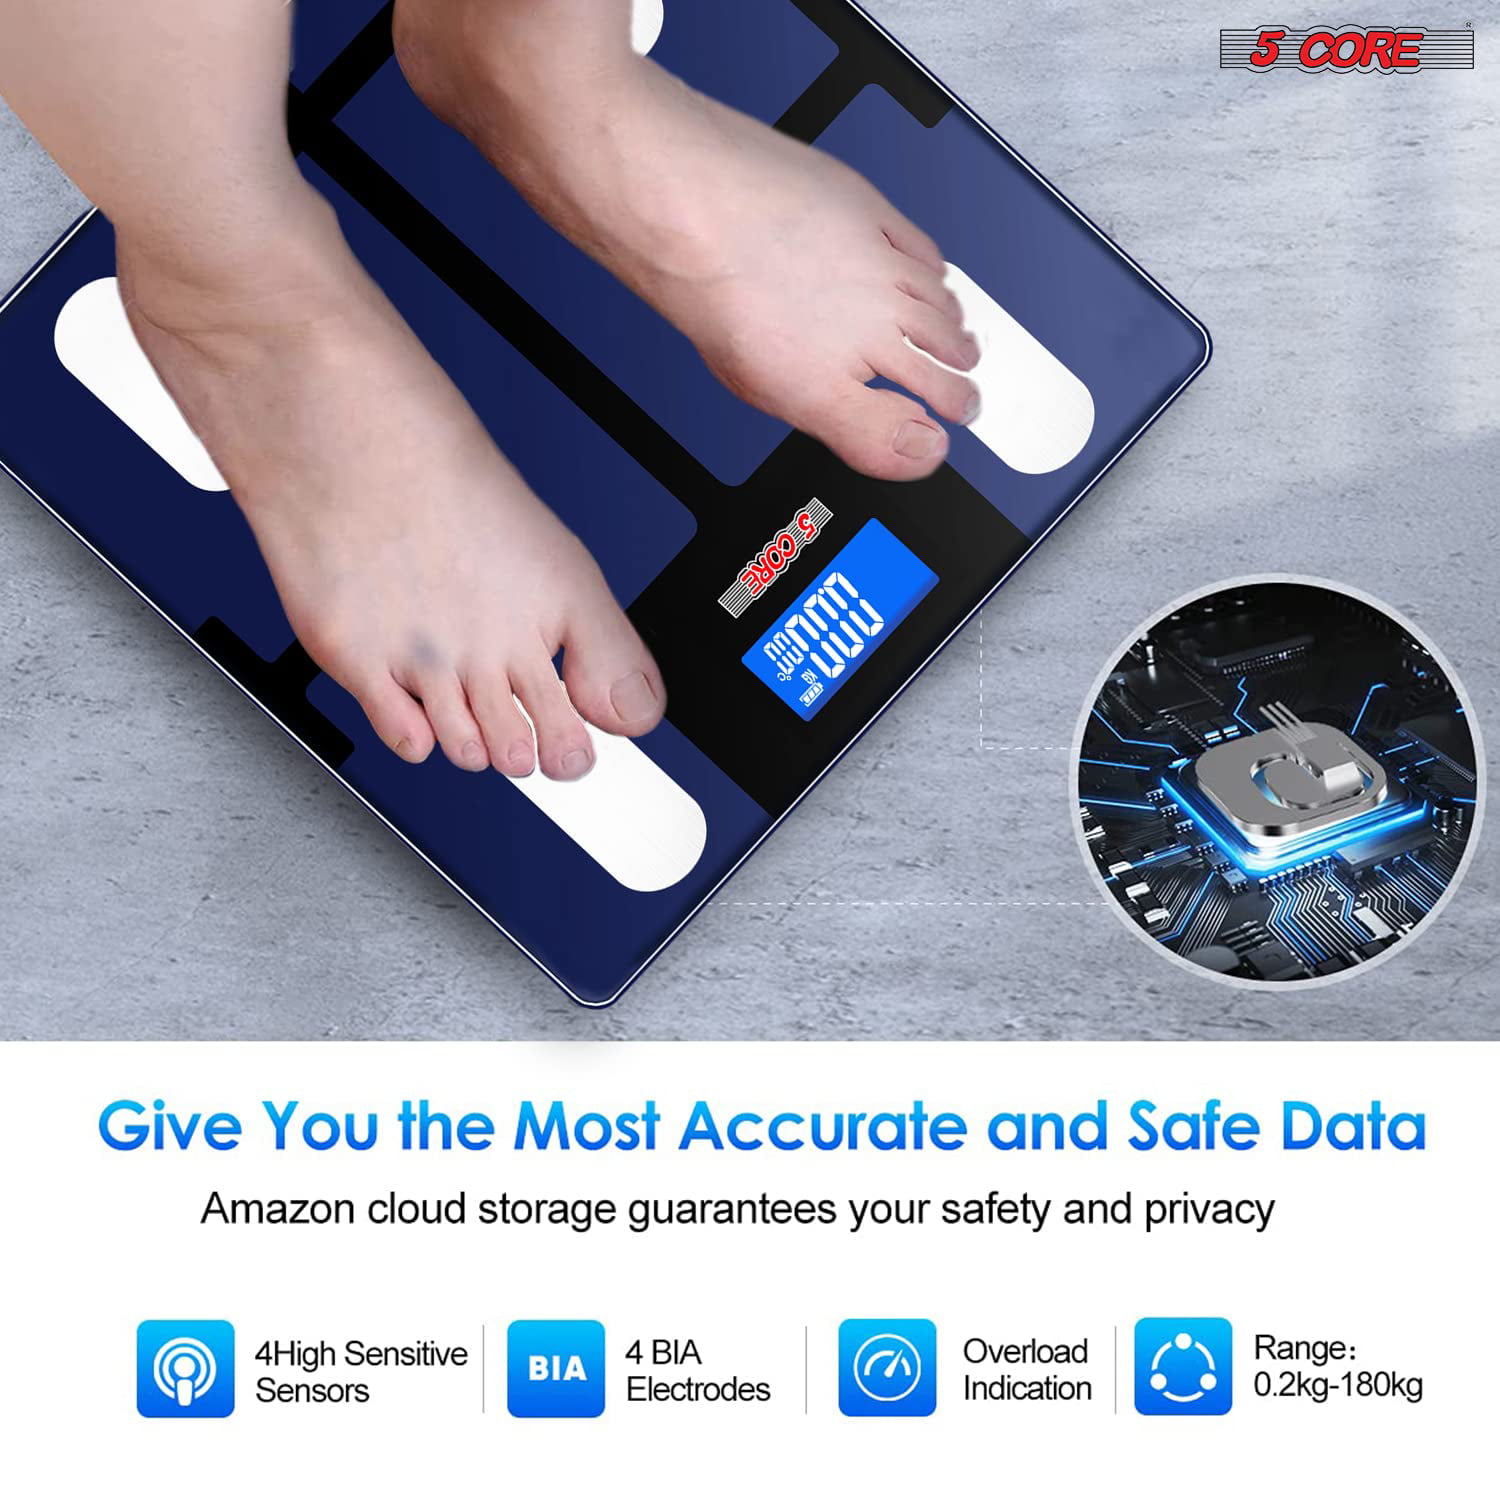 Dropship 5 Core Scales For Body Weight Fat Bathroom Scale Smart Digital  Bluetooth Weighing BMI Bascula Digital De Peso Y Grasa Corporal 400 Lbs -  BBS VL B BLK to Sell Online